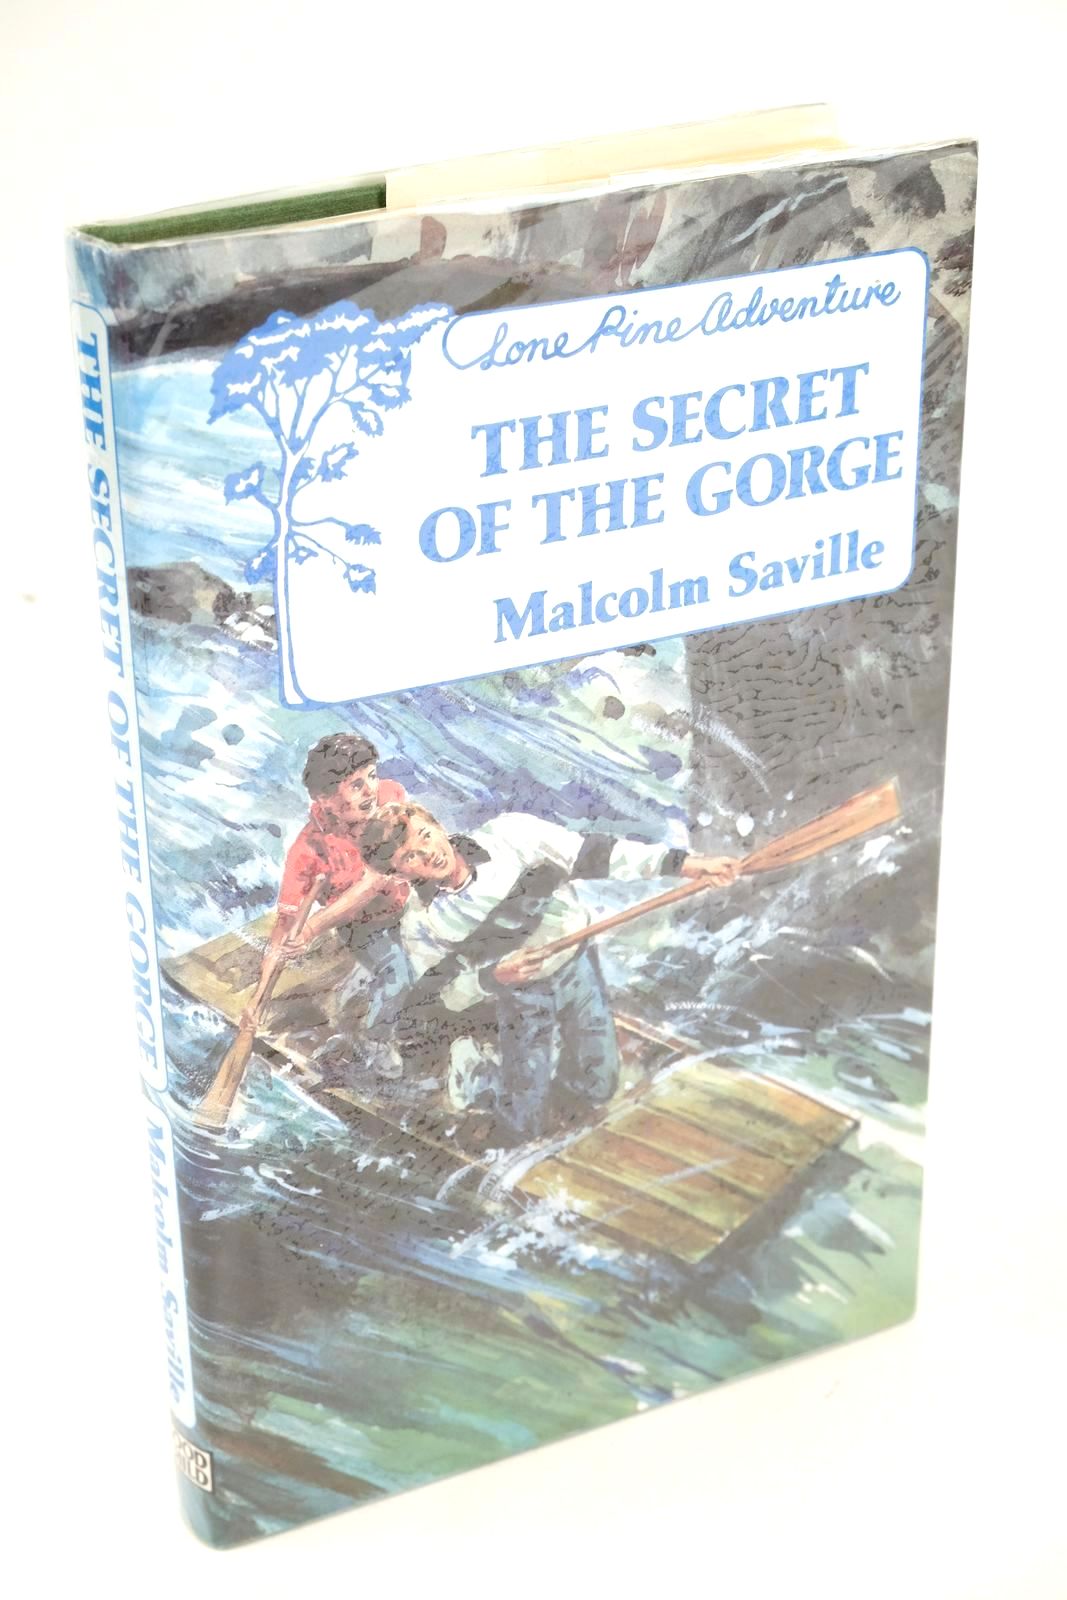 Photo of THE SECRET OF THE GORGE written by Saville, Malcolm published by John Goodchild (STOCK CODE: 1325446)  for sale by Stella & Rose's Books